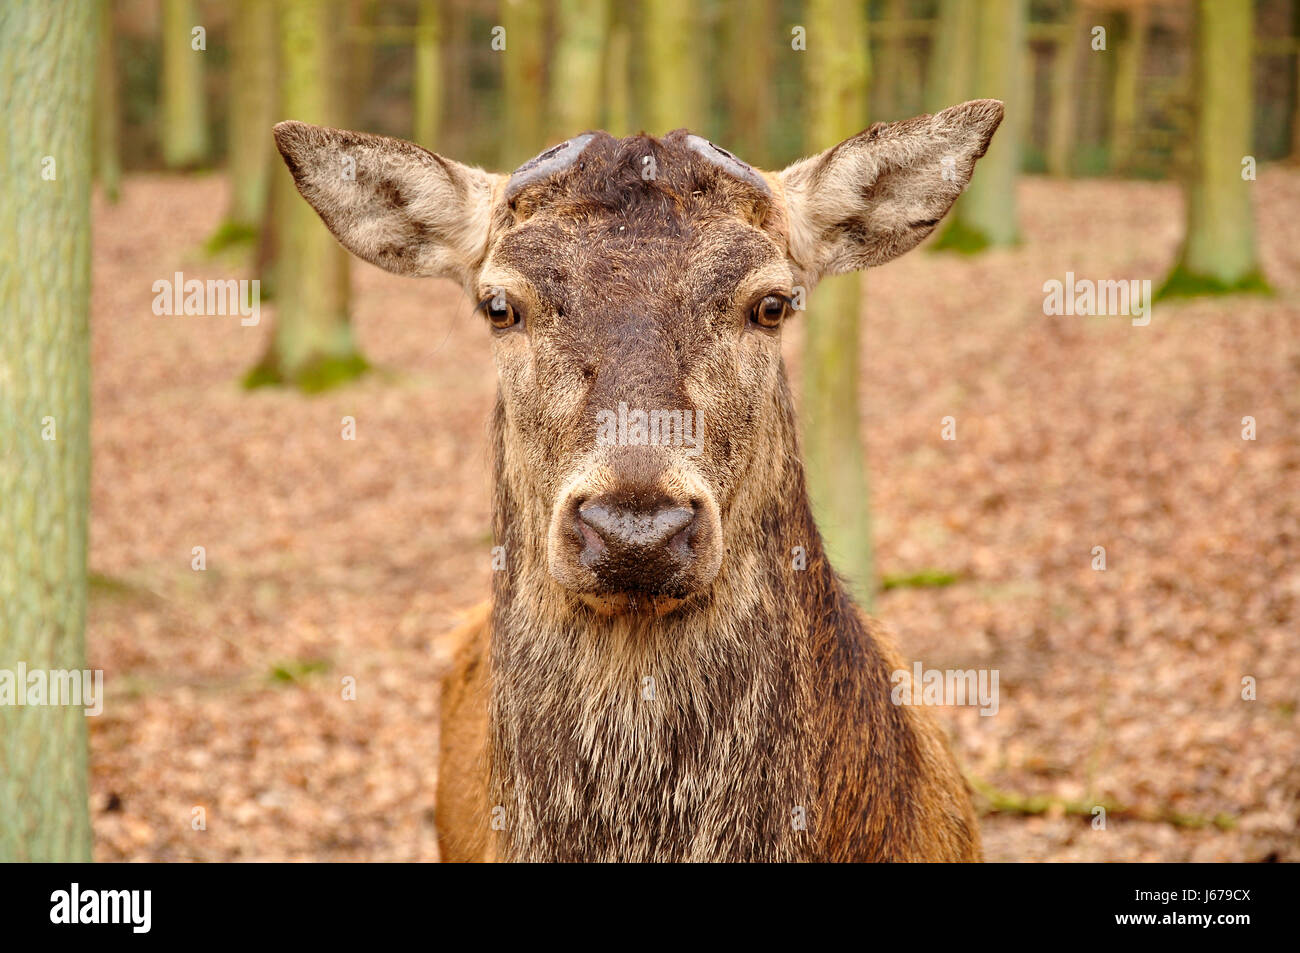 deer-without-antlers-stock-photo-141531962-alamy